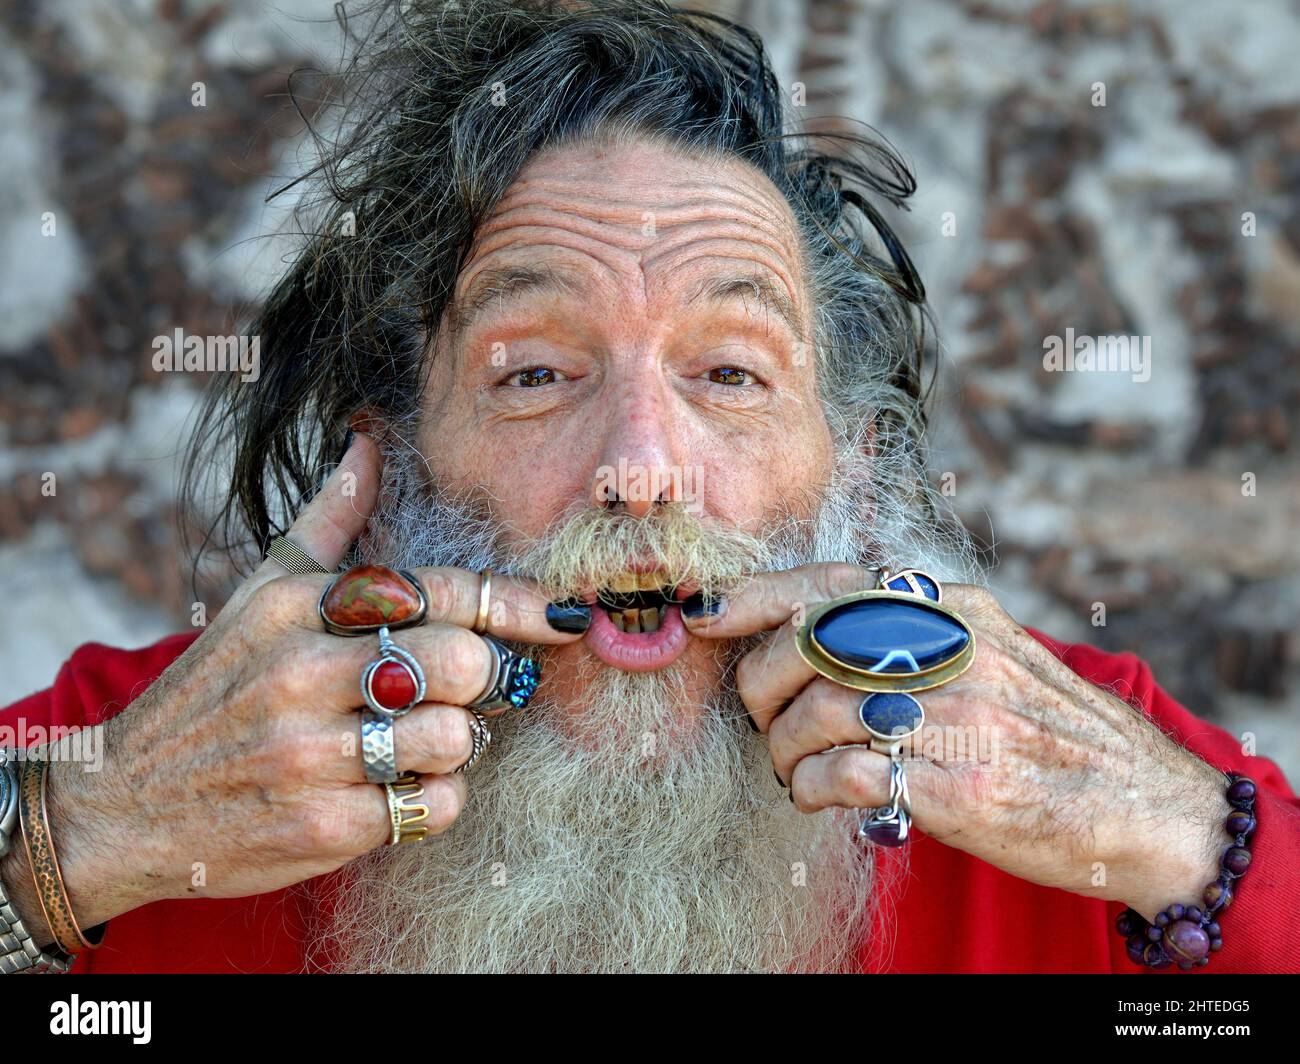 Old Caucasian man shows his mouth and expresses an optimistic talk-the-positive alternative to the negative talk-no-evil of the Three Wise Monkeys. Stock Photo